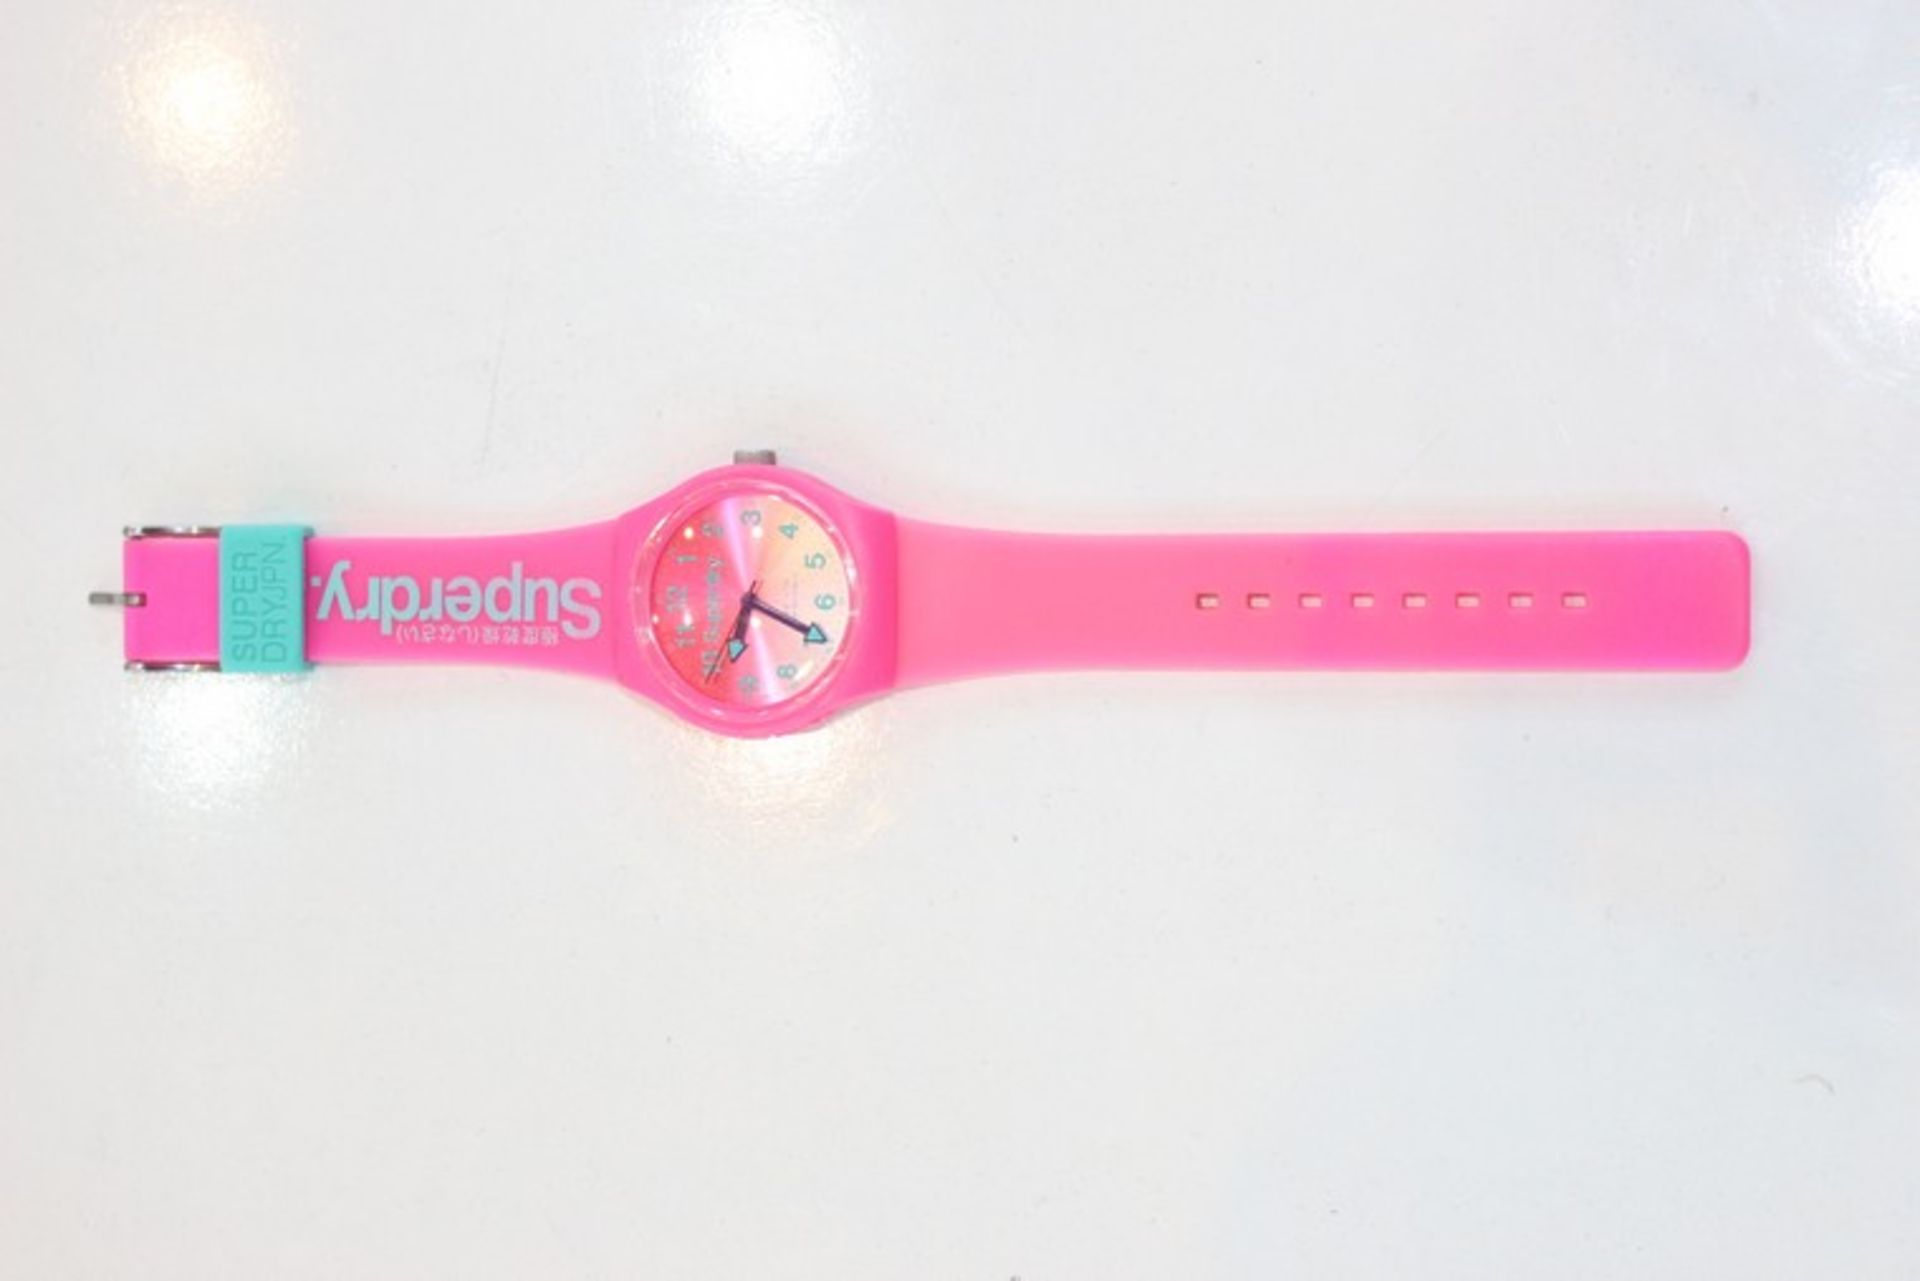 1 x WOMENS SUPER DRY WRIST WATCH (07.09.17) *PLEASE NOTE THAT THE BID PRICE IS MULTIPLIED BY THE